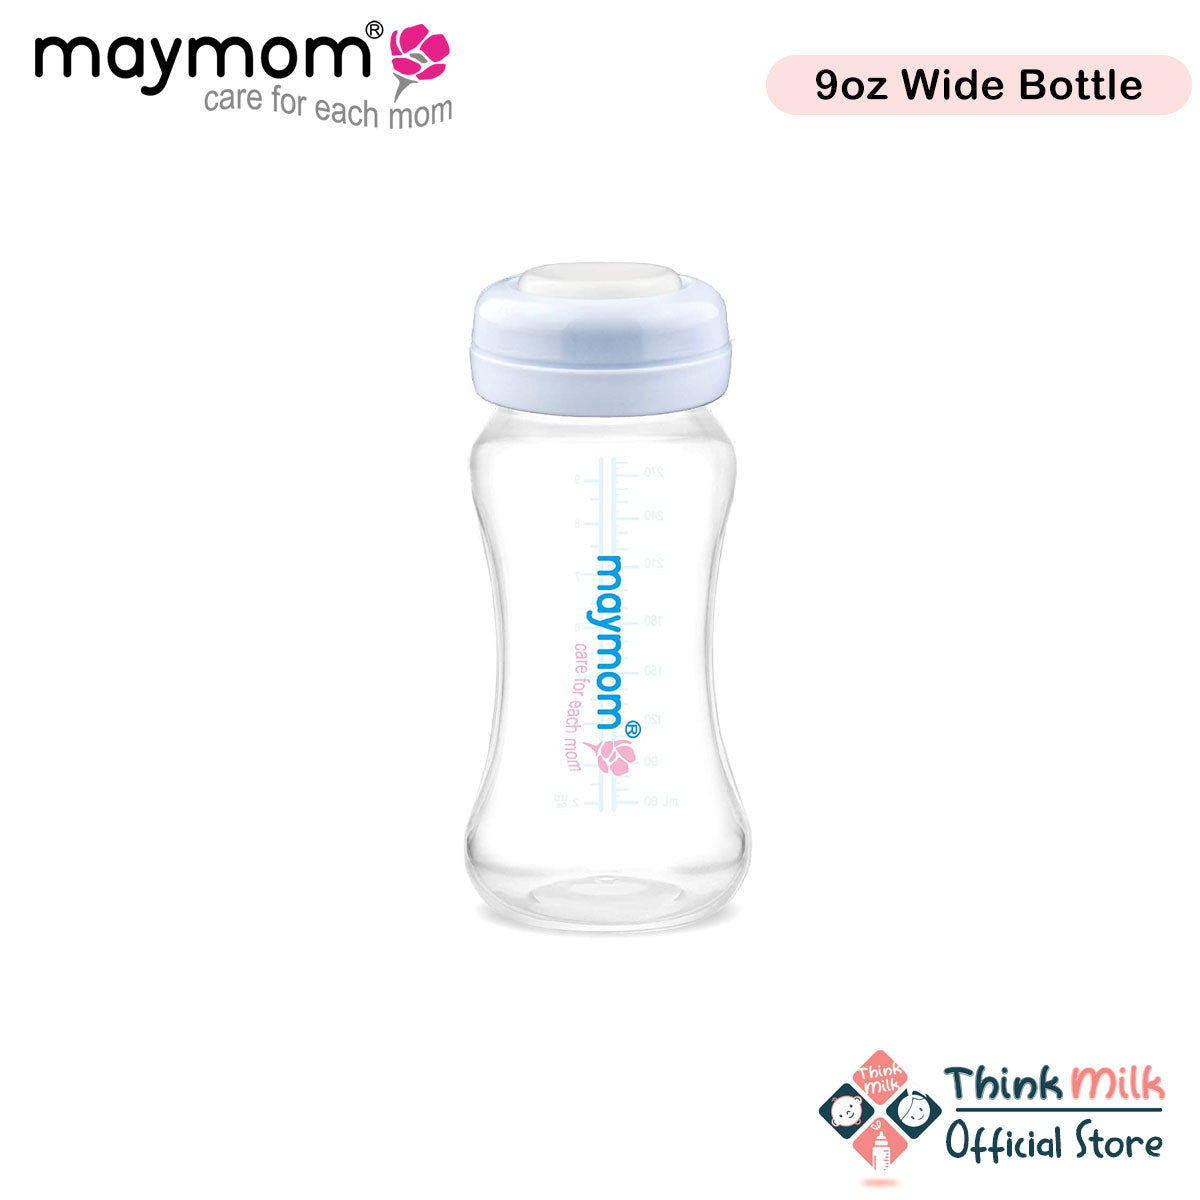 Maymom Wide Neck Milk Storage Collection Bottle with SureSeal Sealing Disk